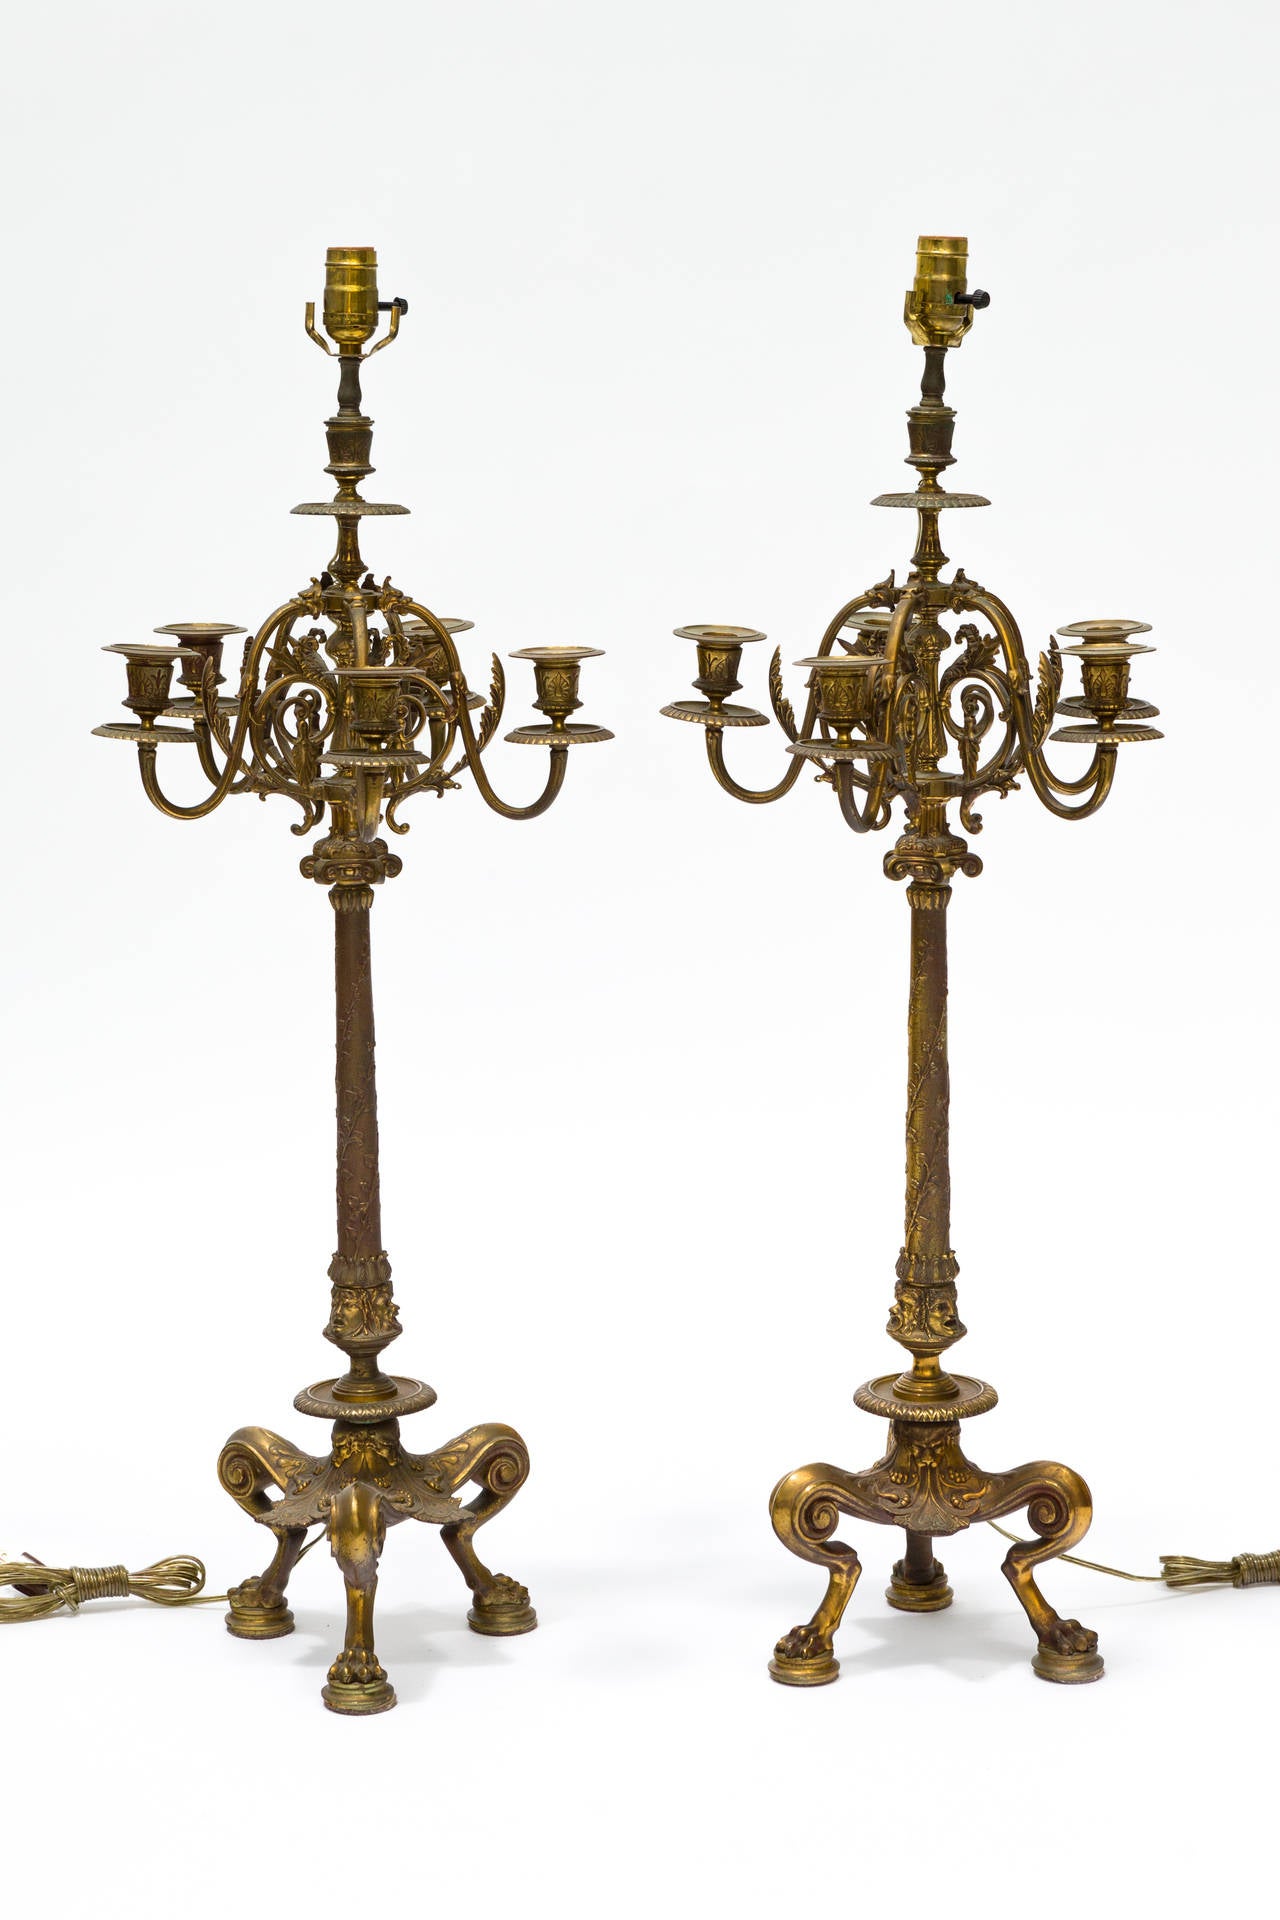 Pair of brass French style  candelabra table lamps.